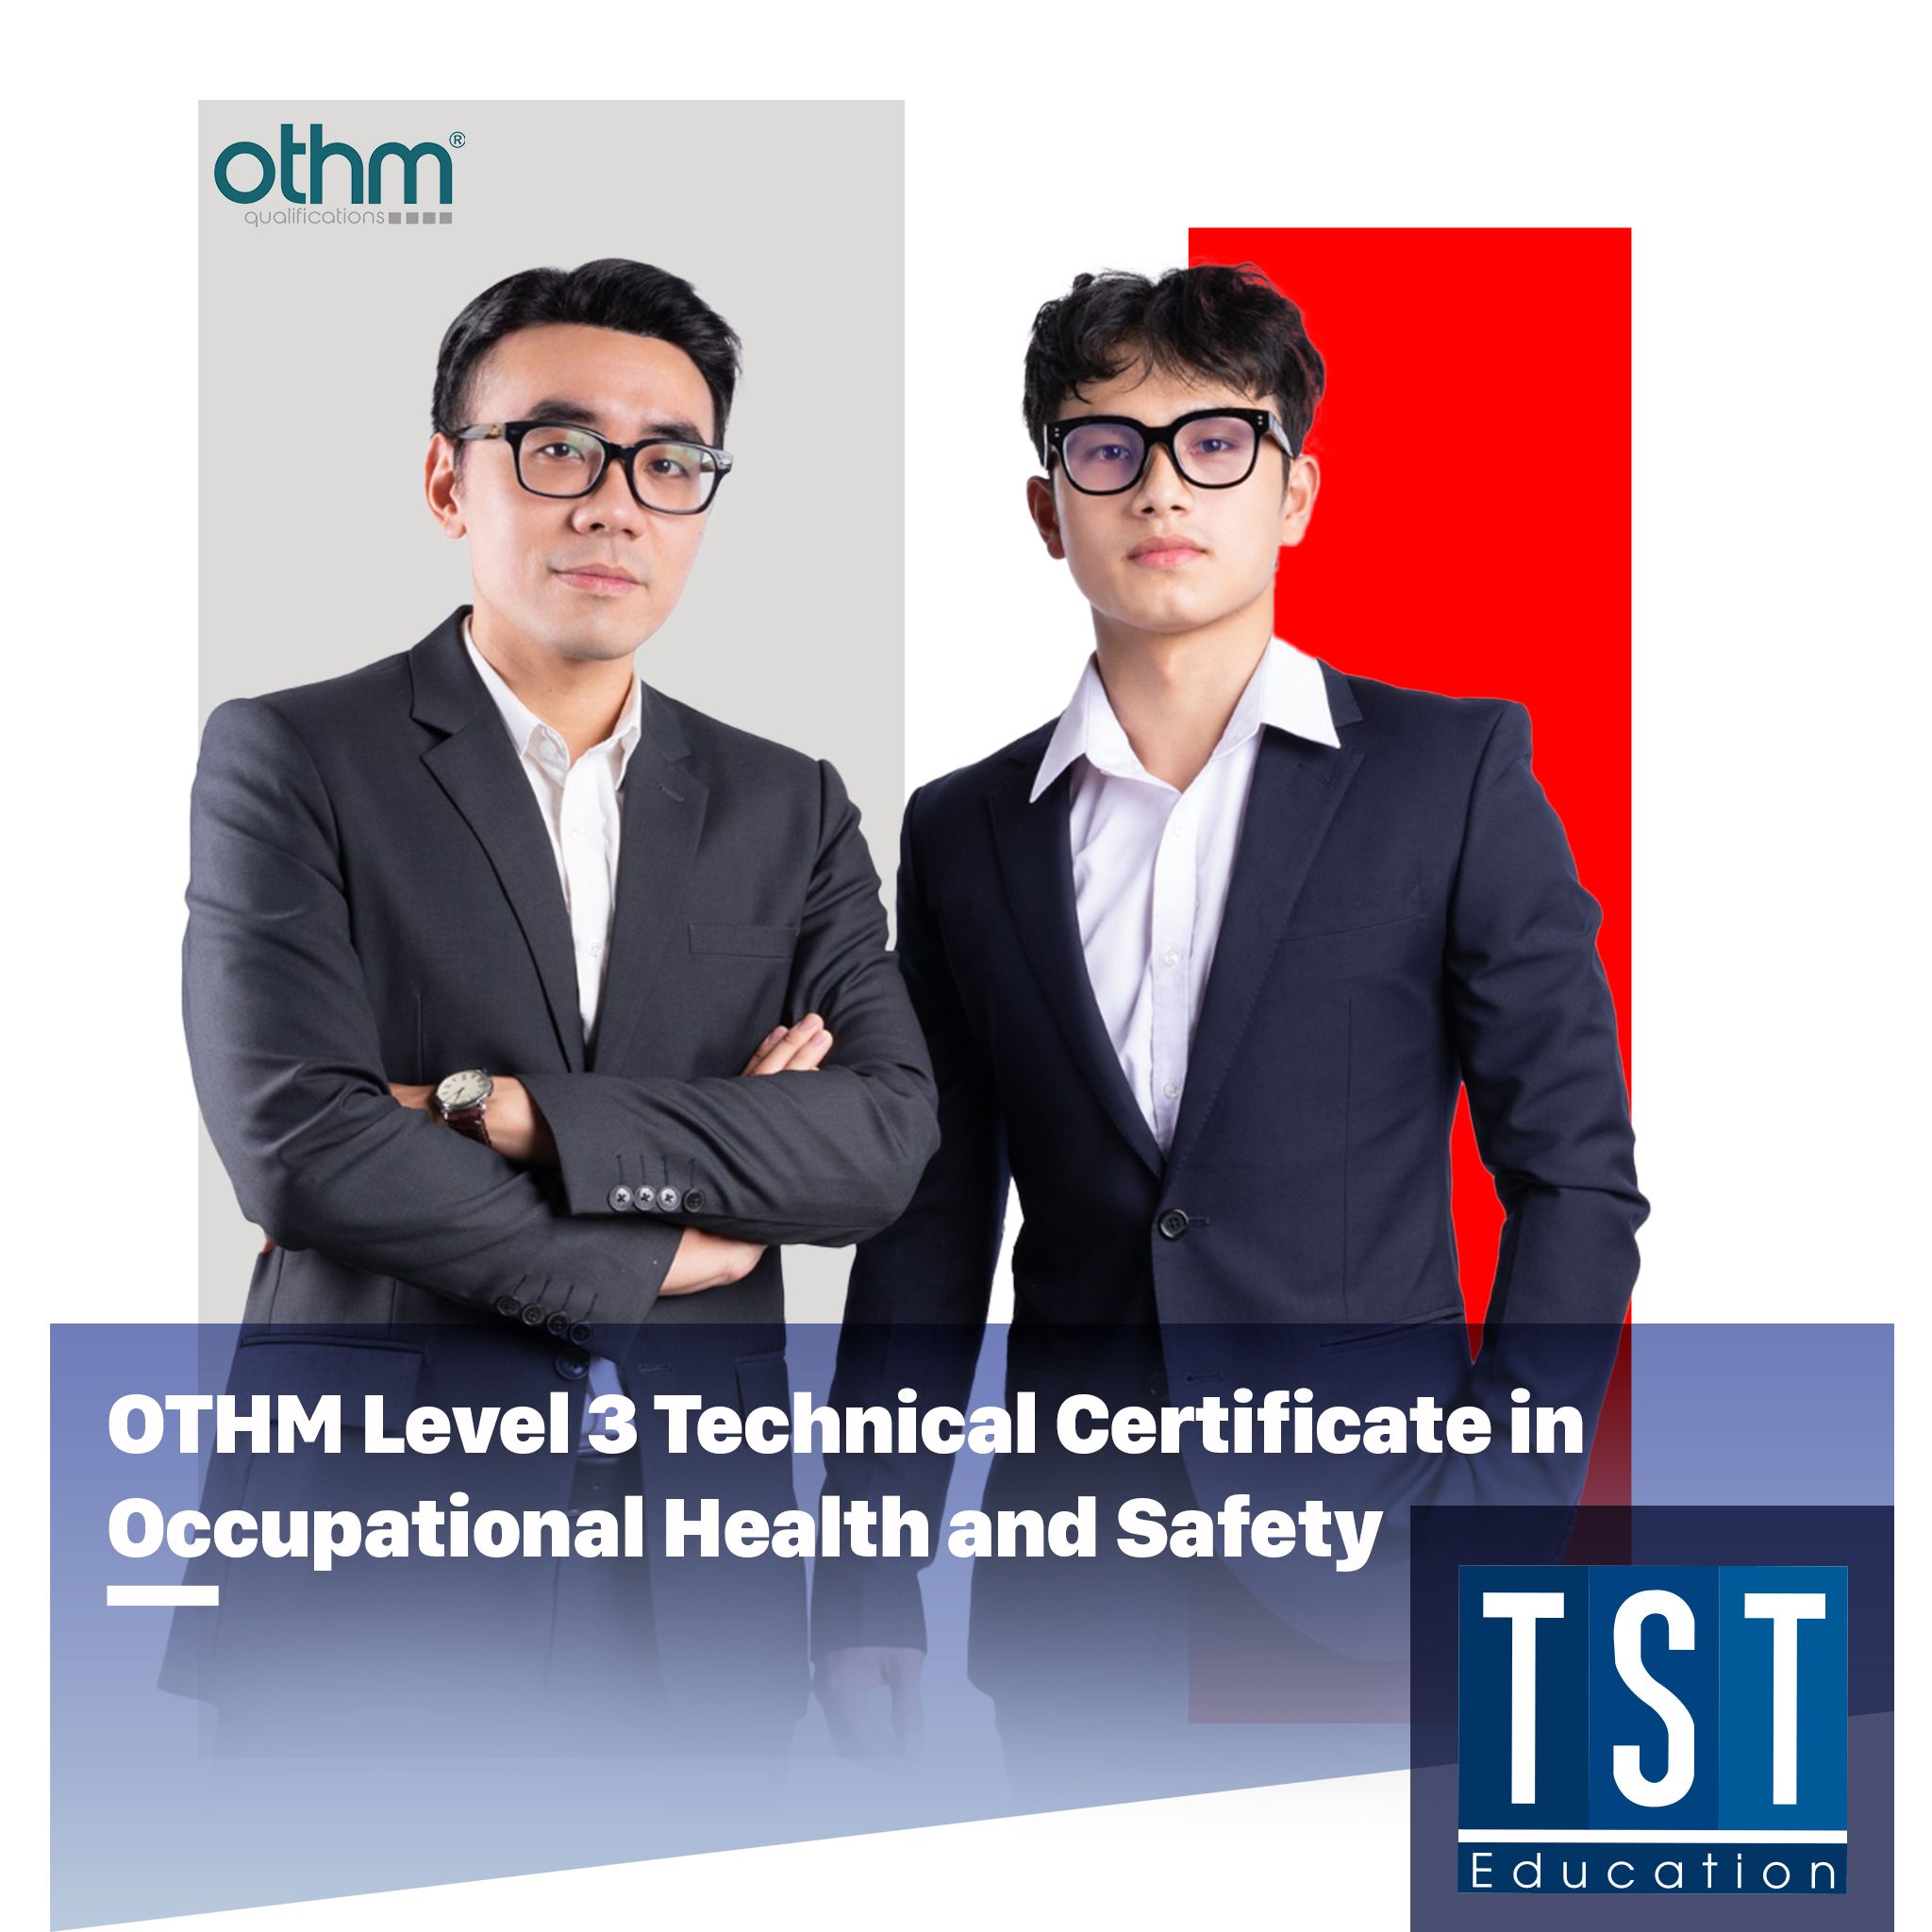  OTHM Level 3 Technical Certificate in Occupational Health and Safety 